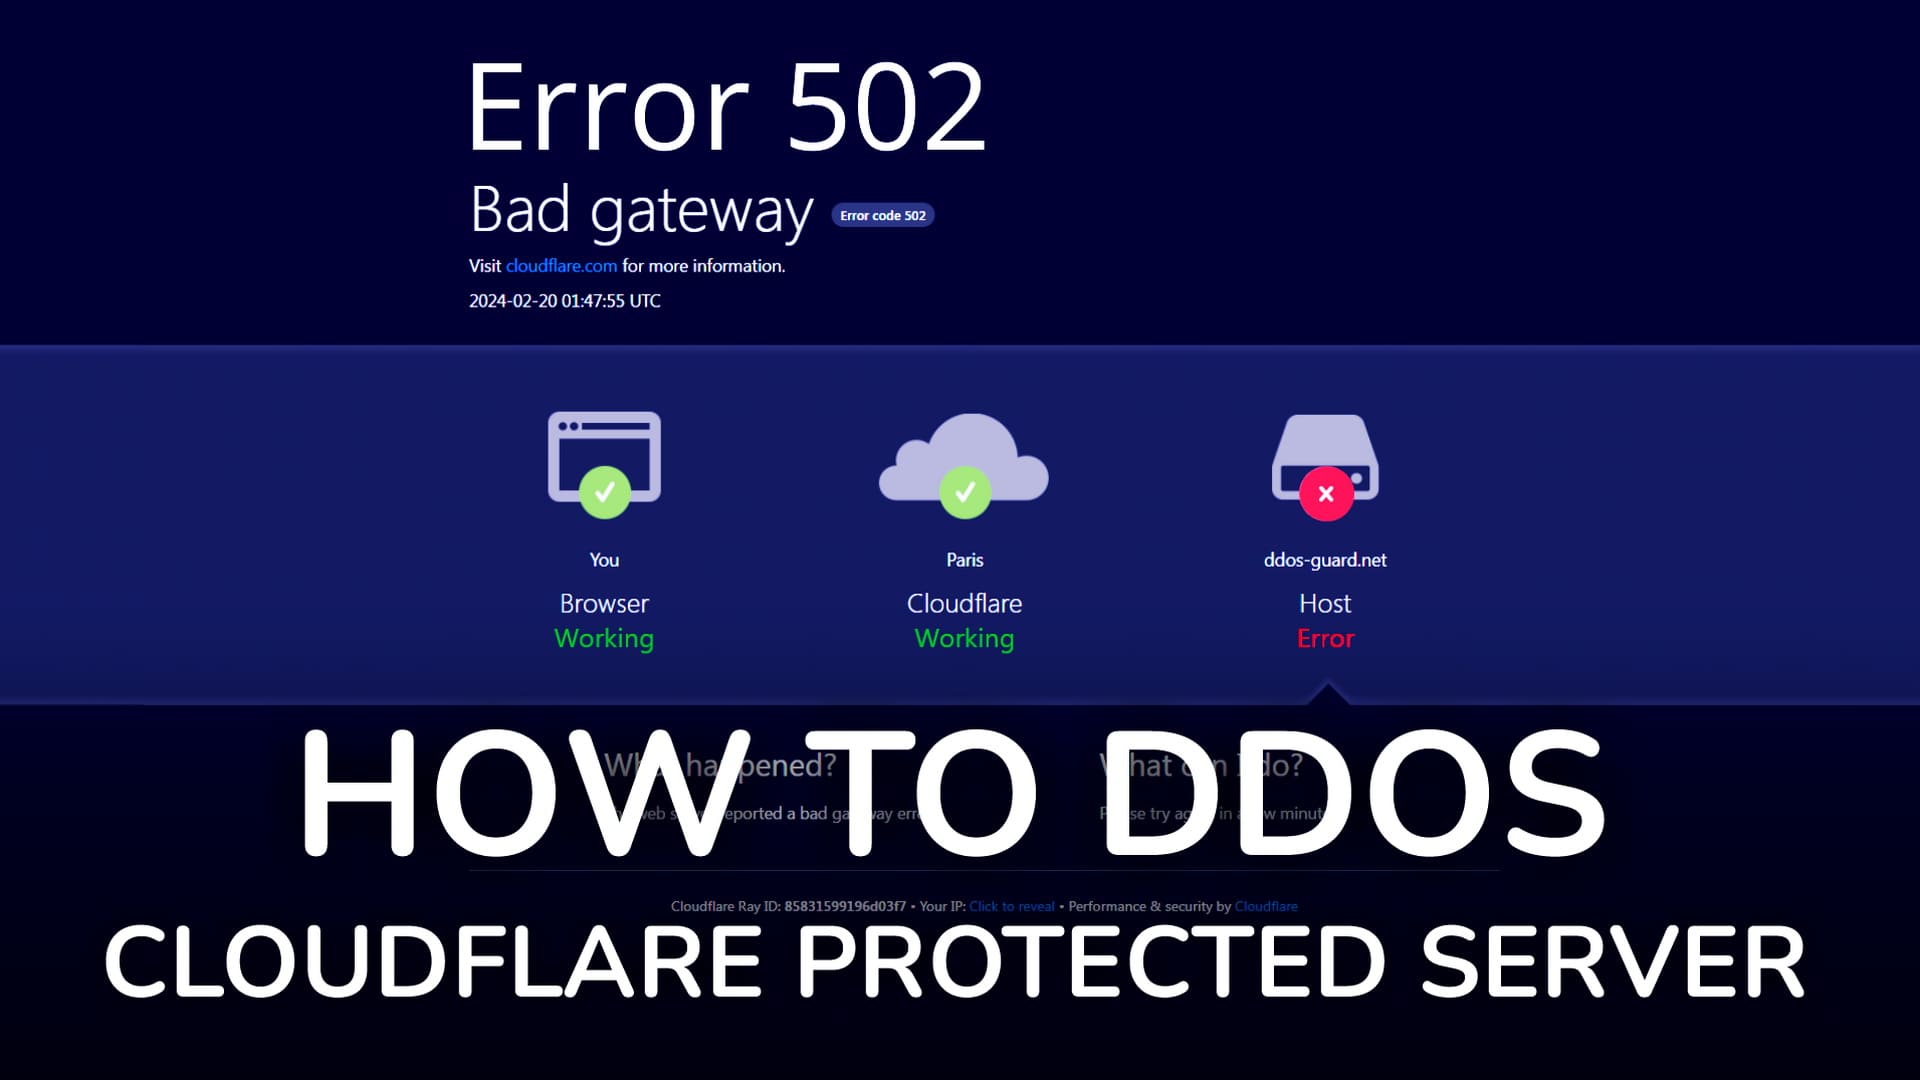 How to DDoS Cloudflare protected server - MAXSTRESSER